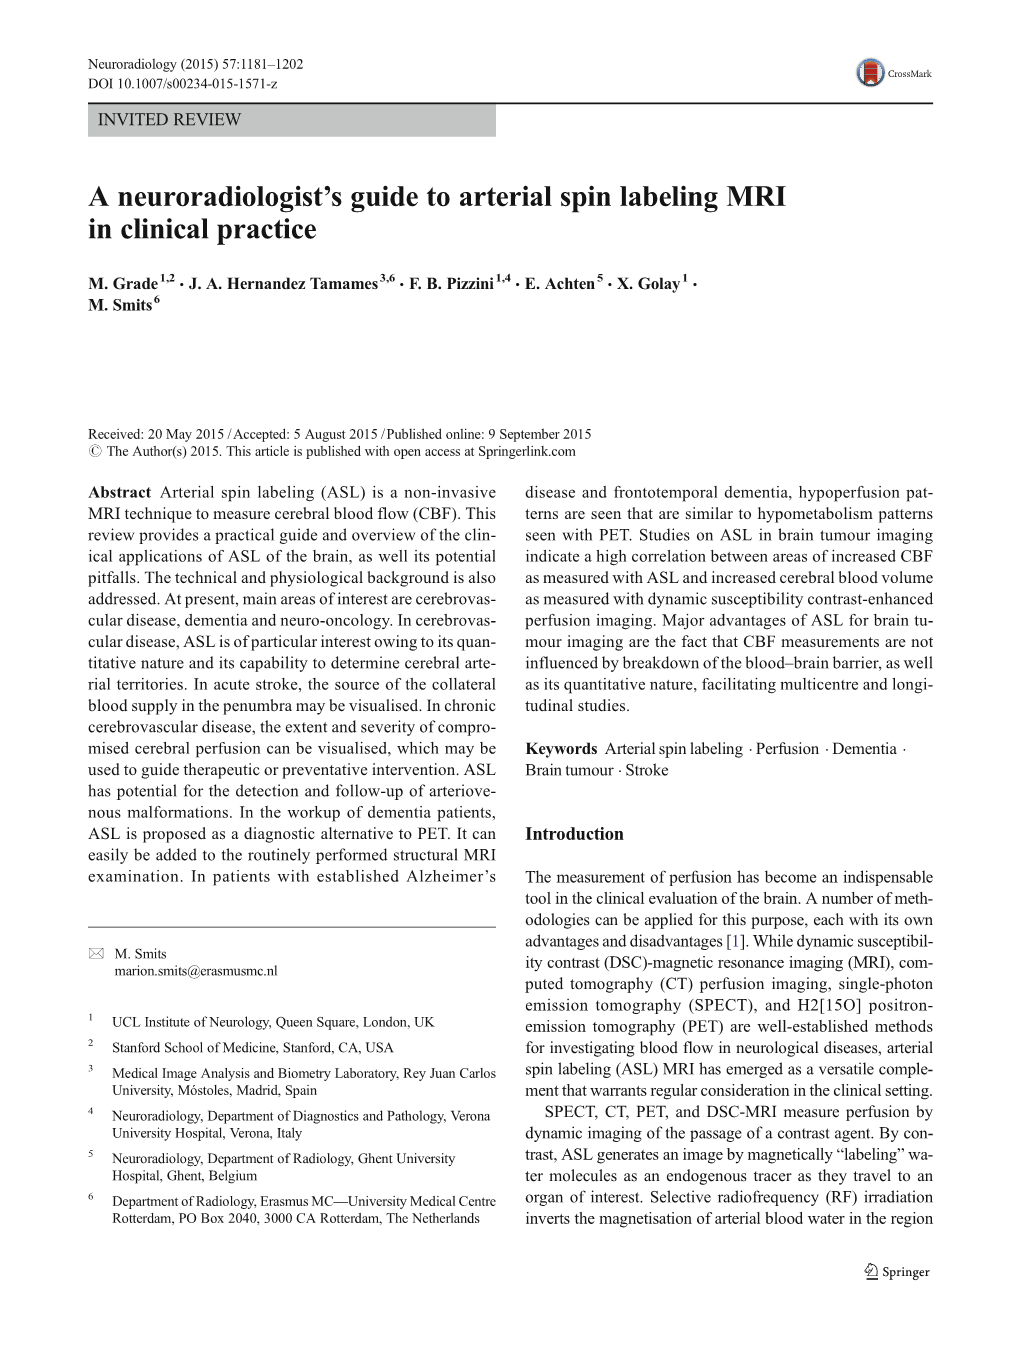 A Neuroradiologist's Guide to Arterial Spin Labeling MRI in Clinical Practice